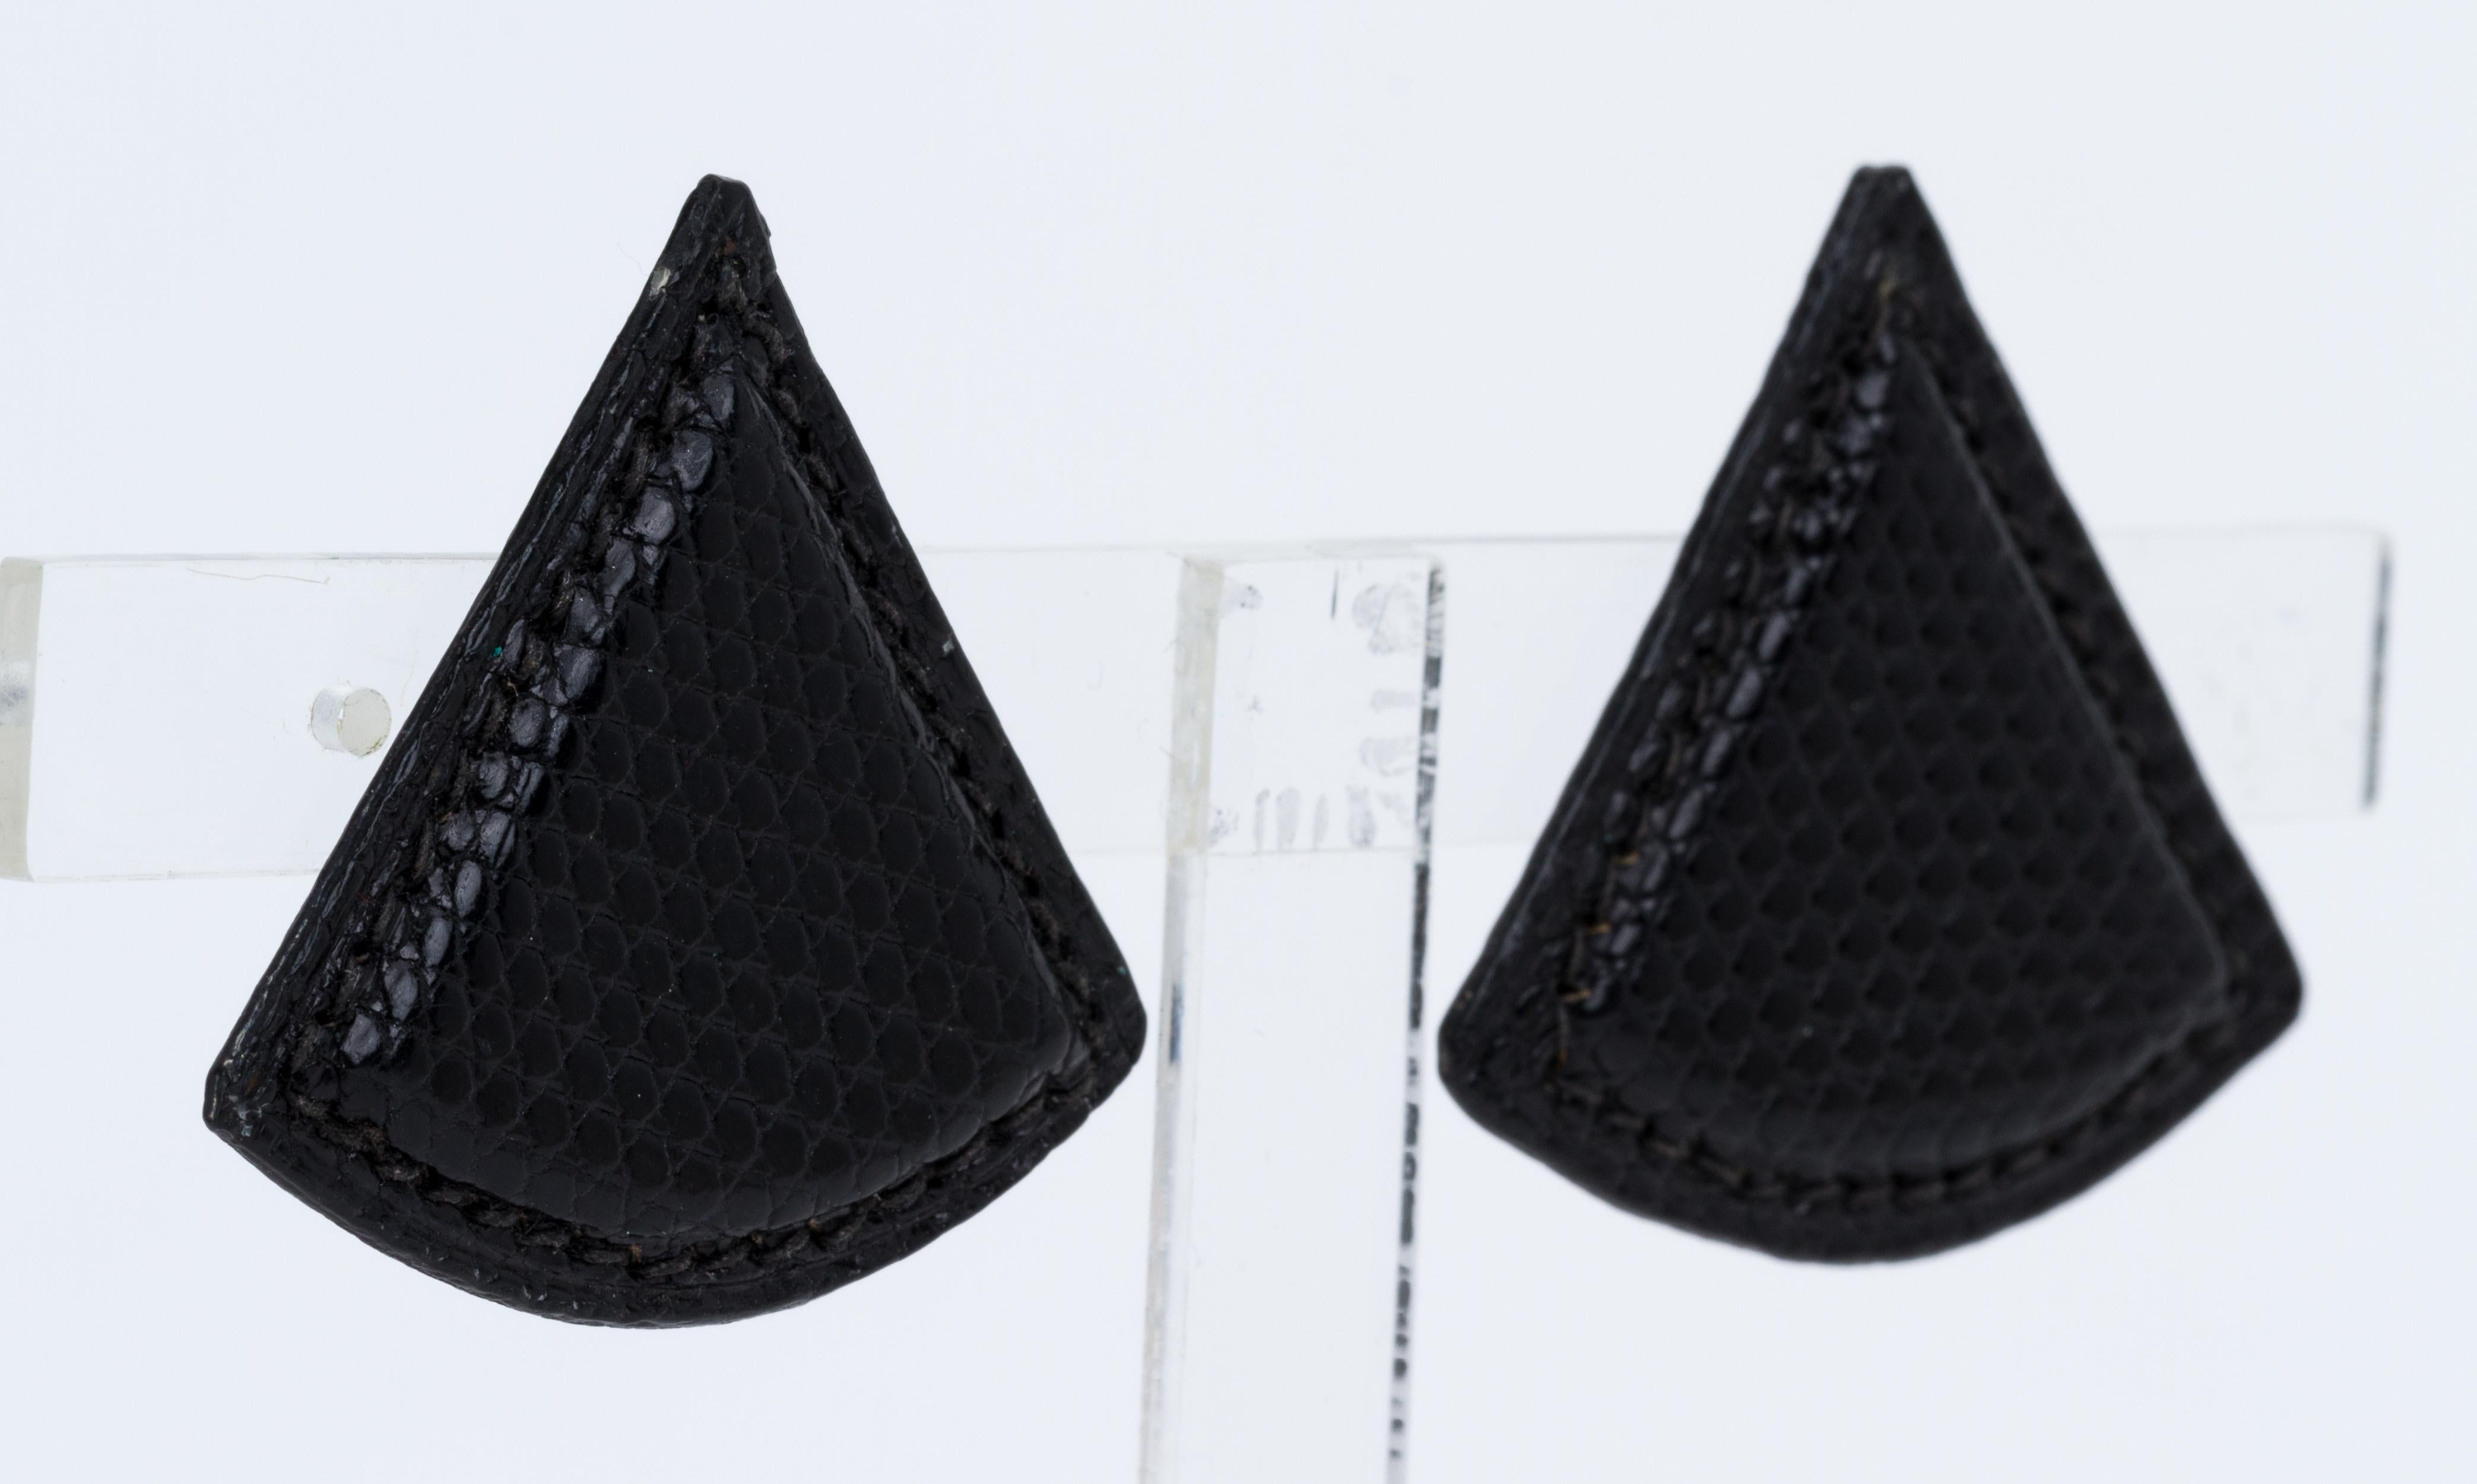 Hermes vintage chic lizard leather triangle clip earrings. Come with velvet pouch.